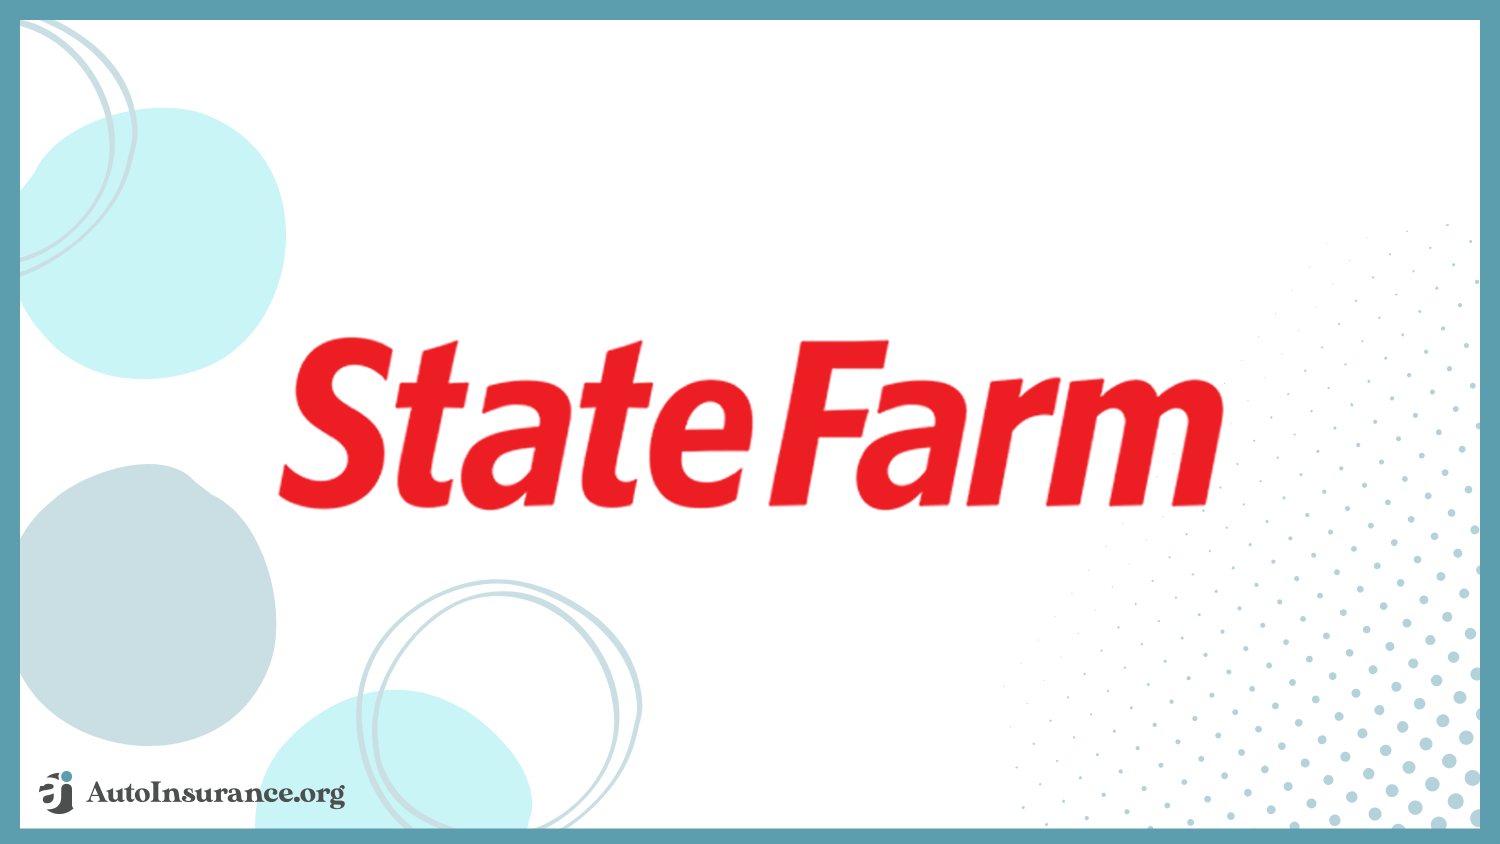 State Farm: Best Auto Insurance for International Drivers